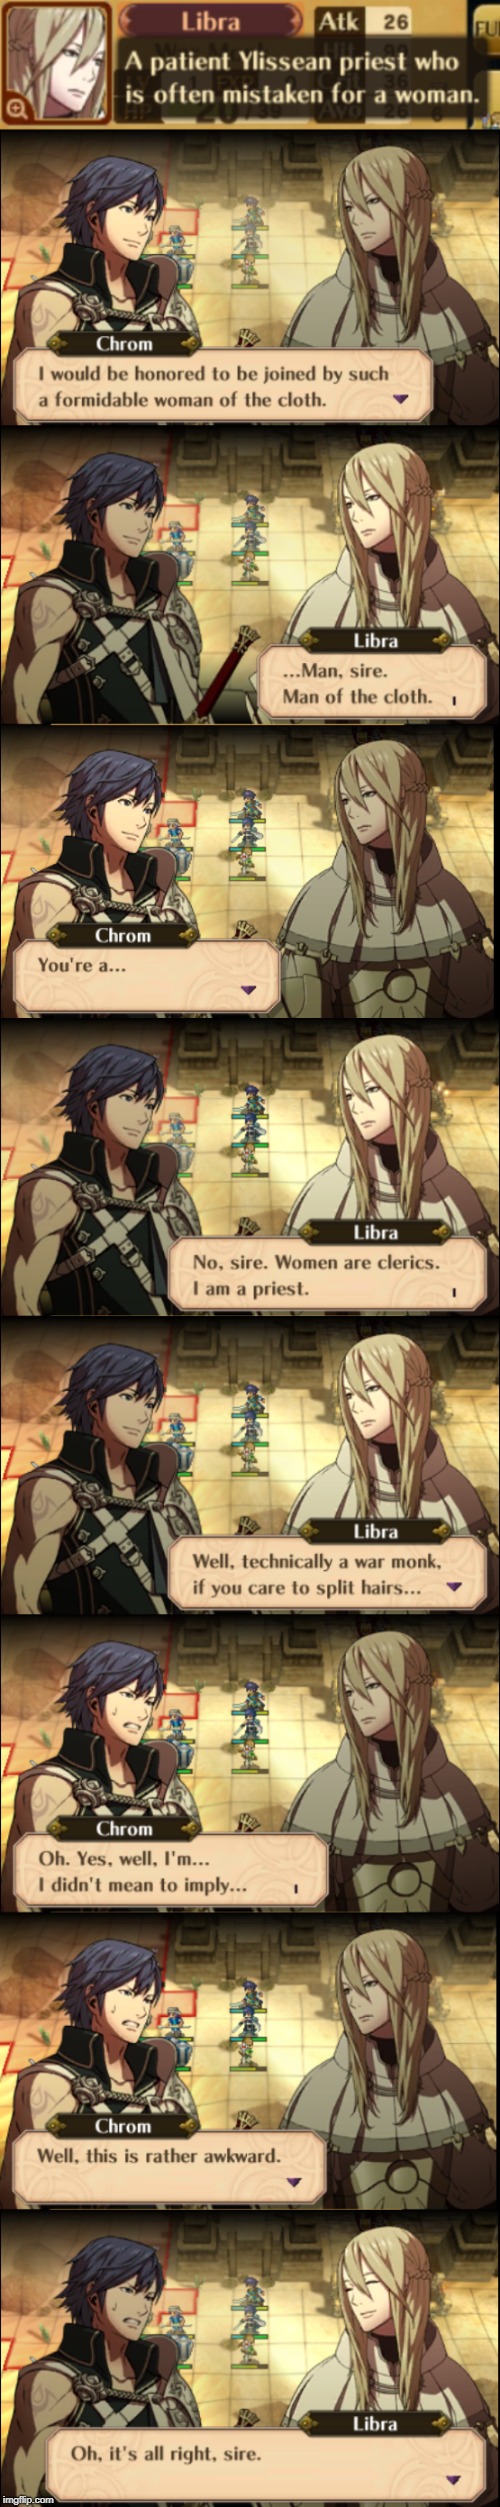 Ladyboy | image tagged in fire emblem | made w/ Imgflip meme maker